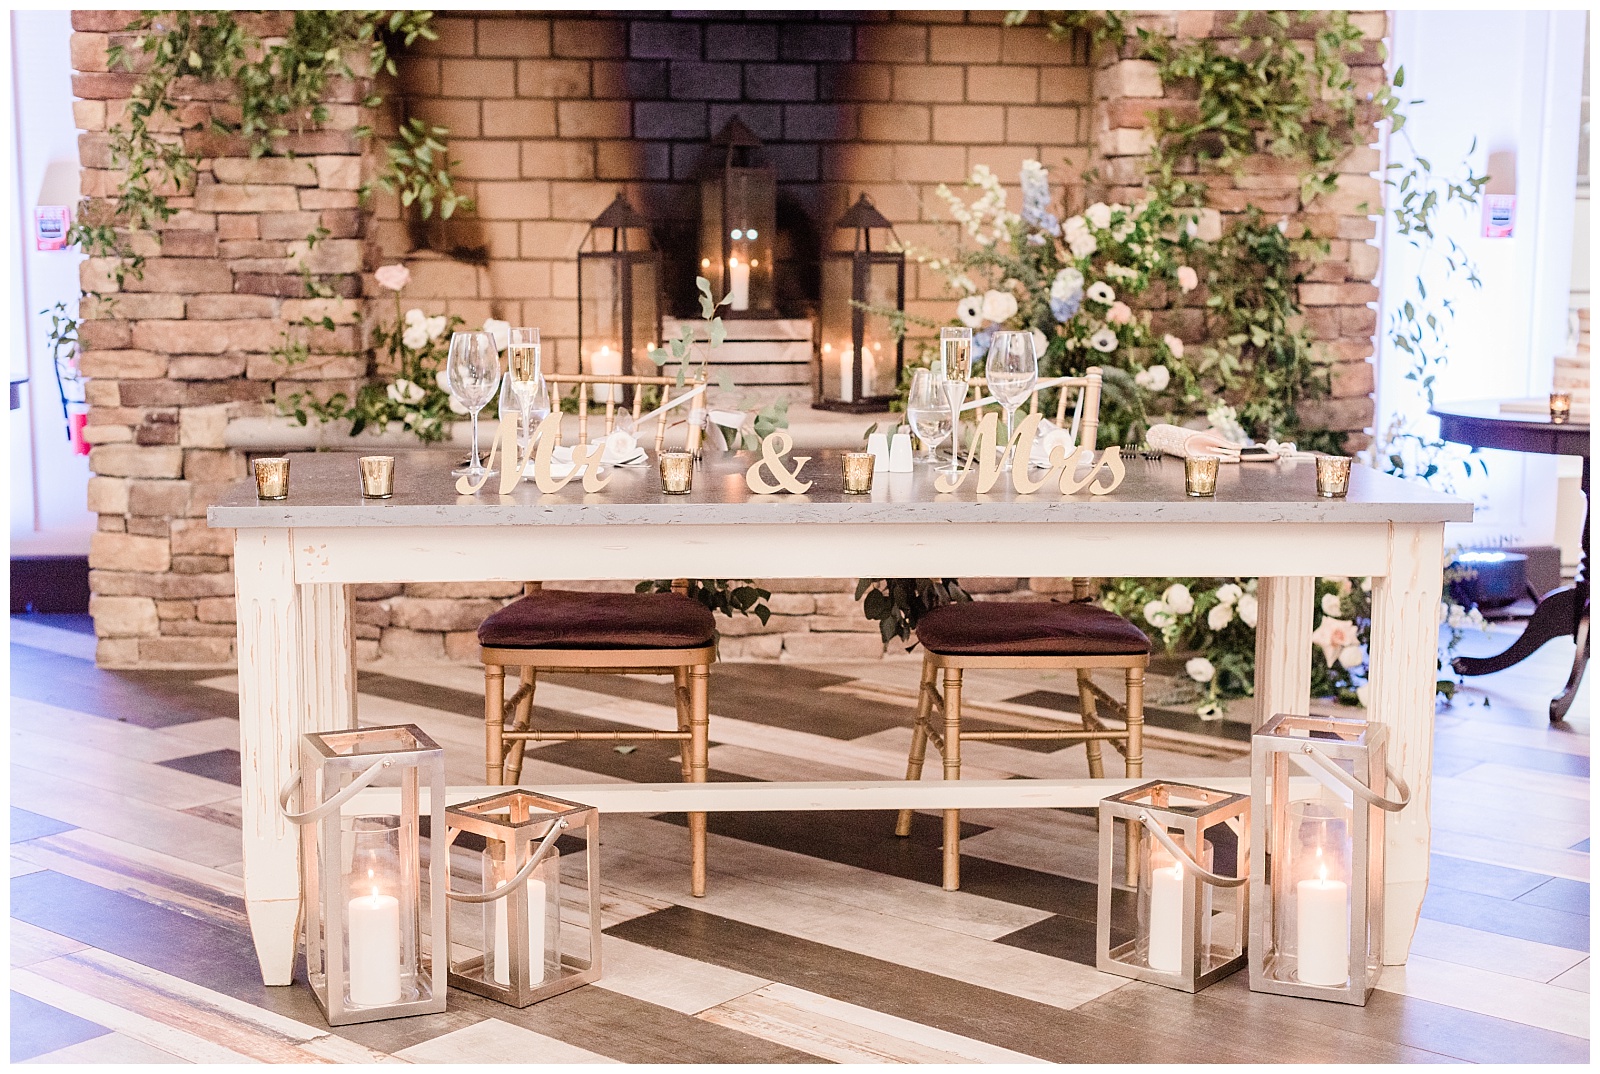 Sweetheart table set up in front of a stone fire place with lanterns and candles.